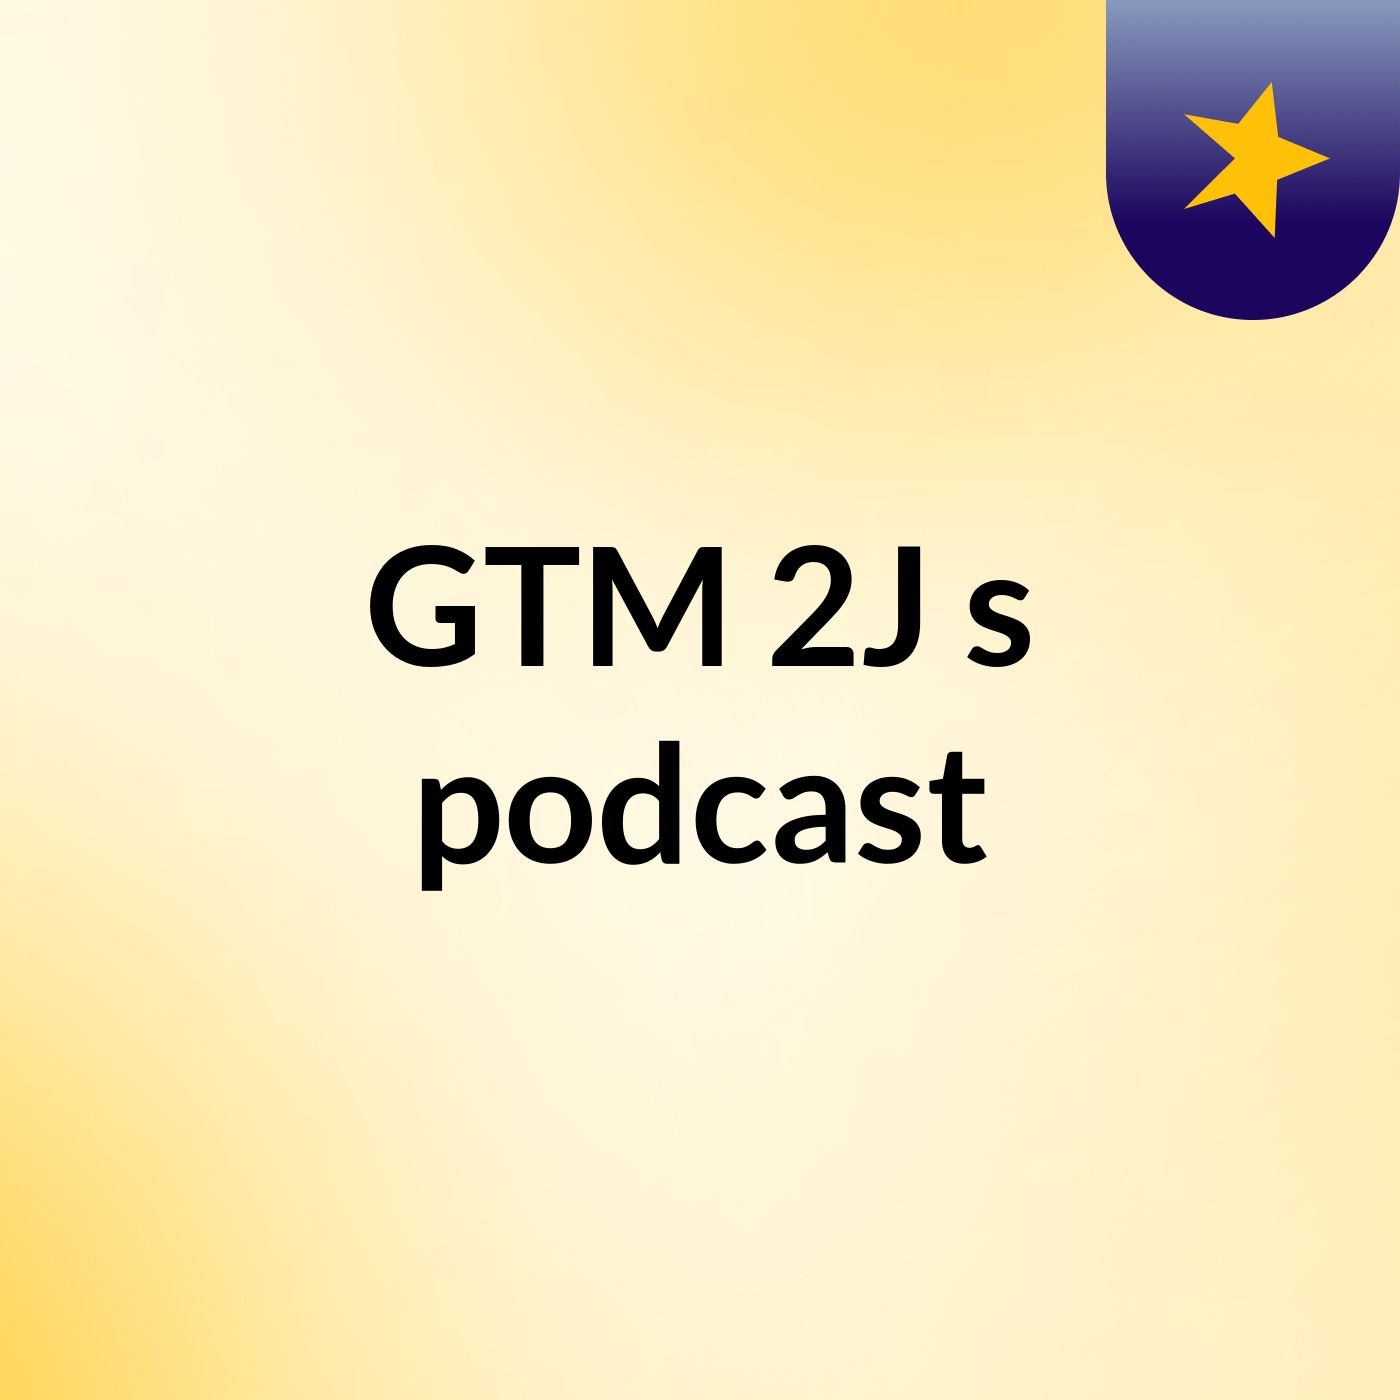 GTM 2J's podcast